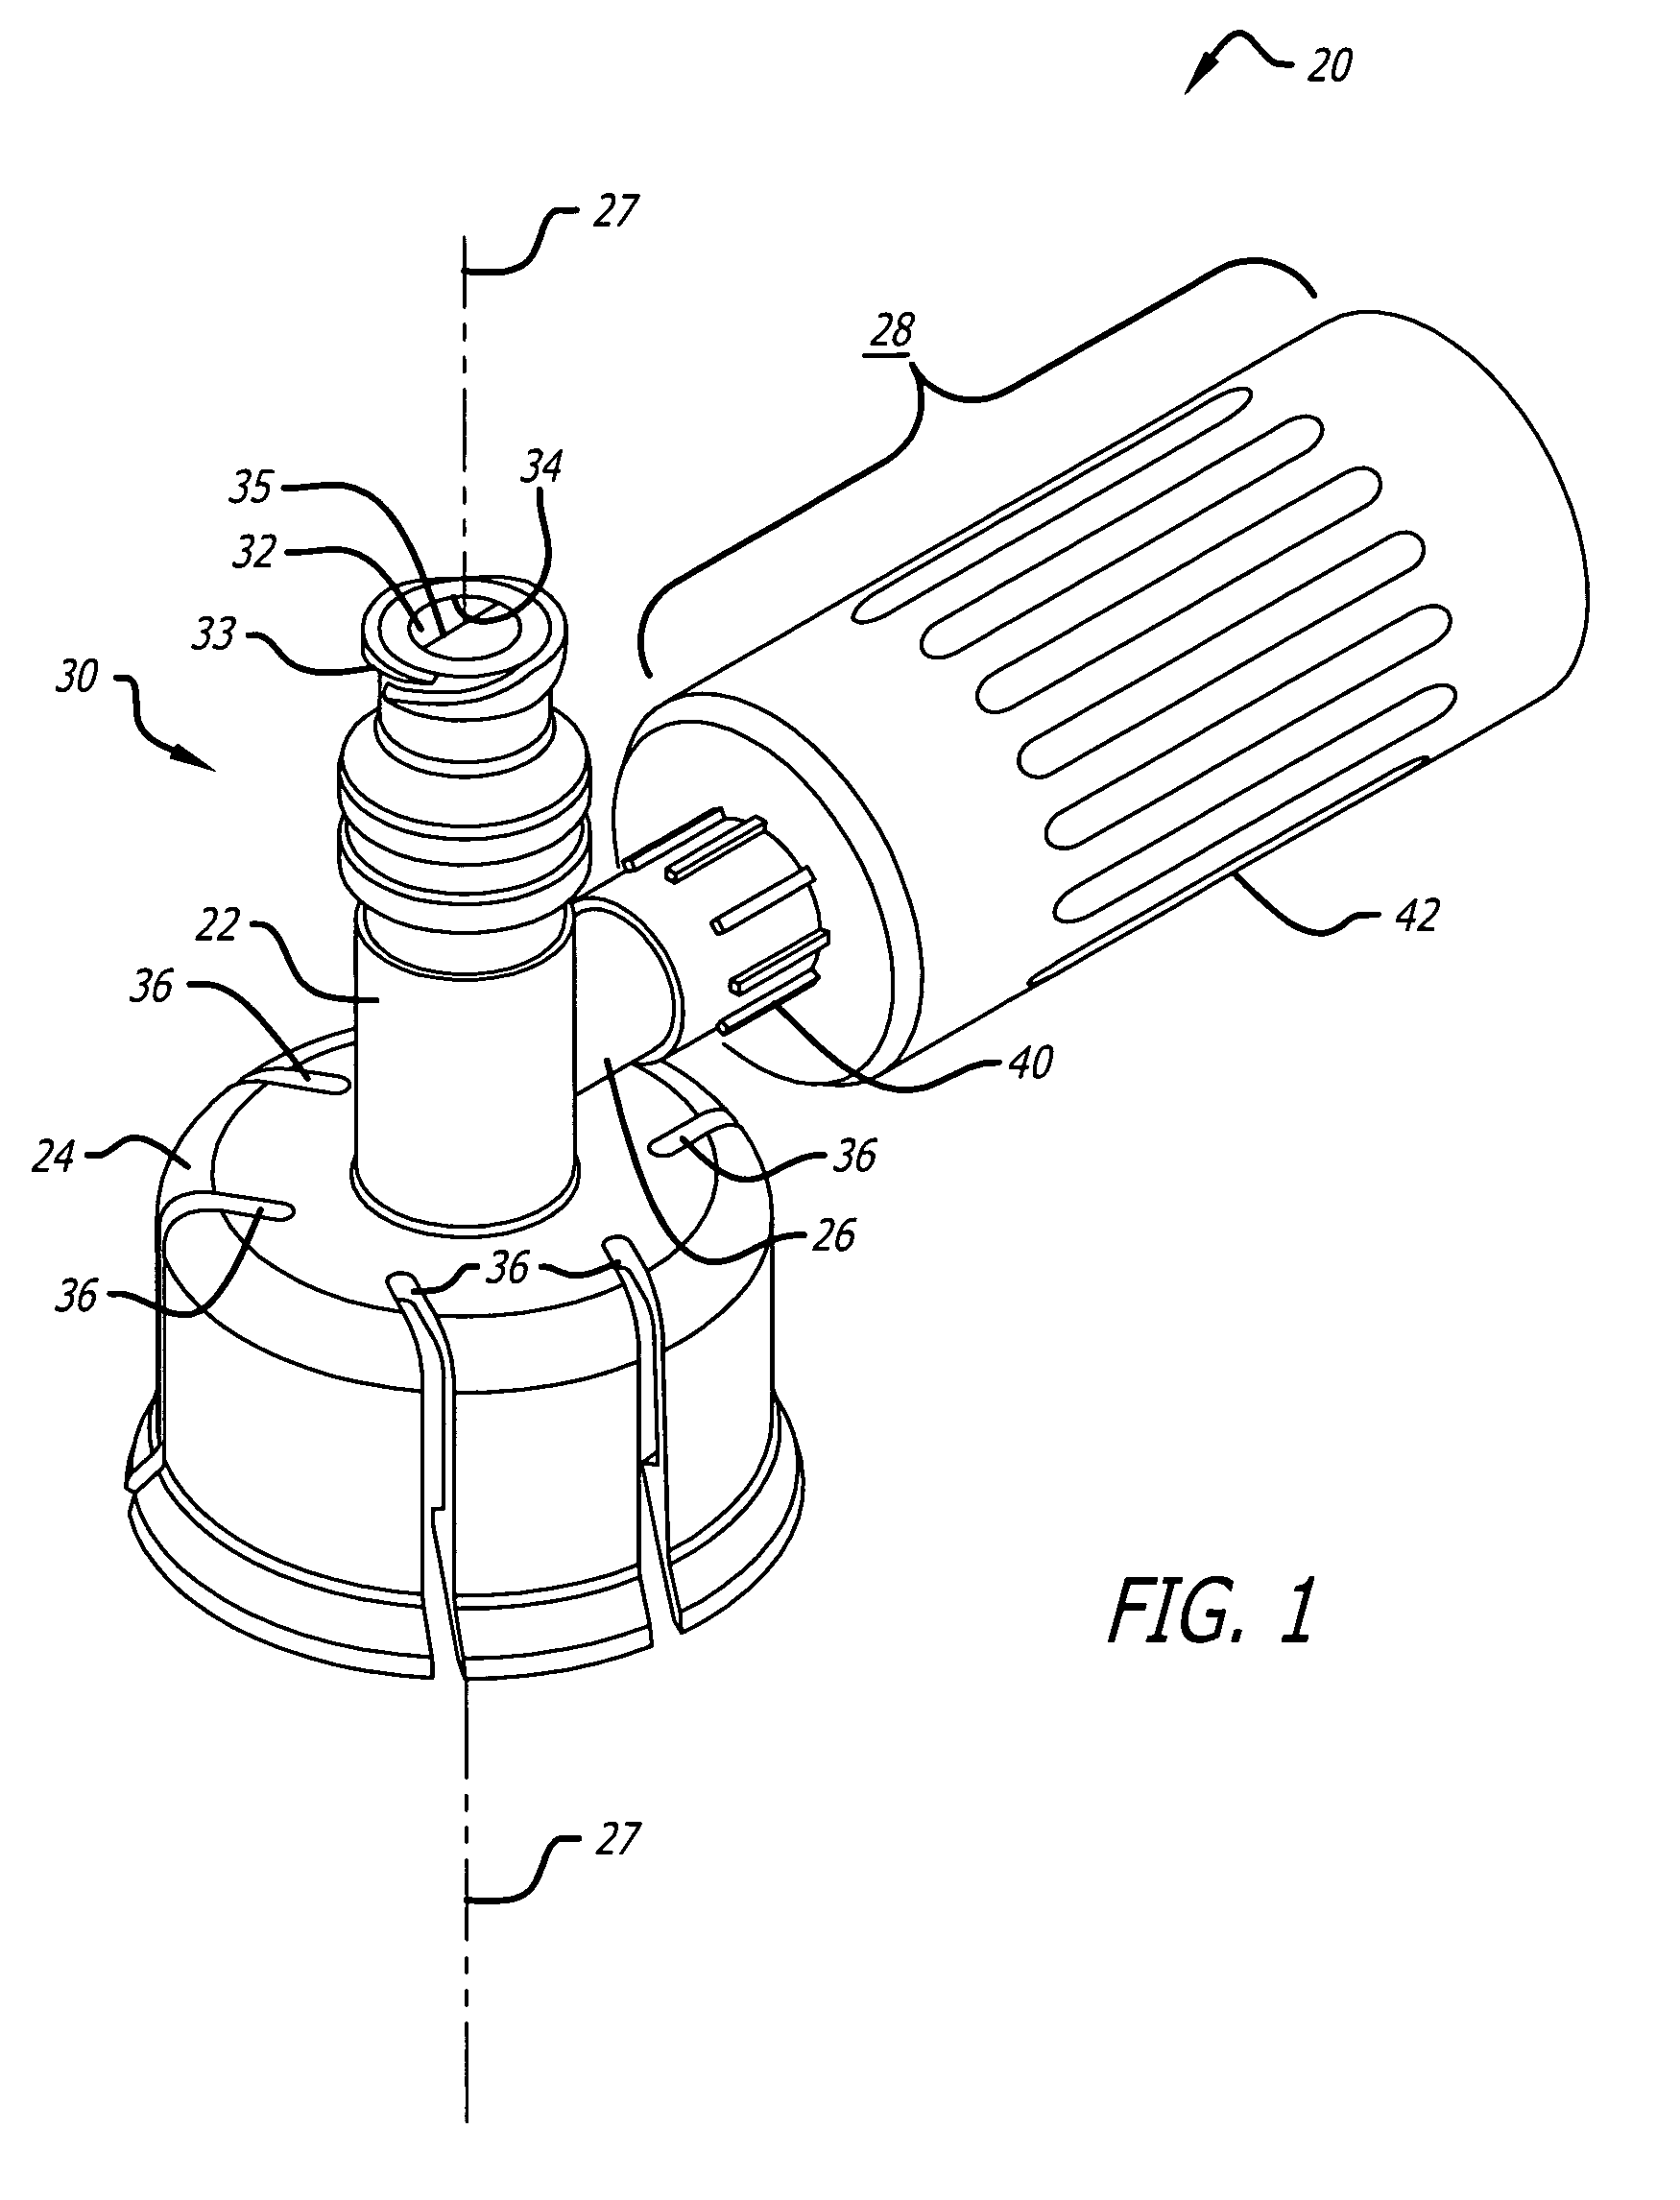 Vented vial adapter with filter for aerosol retention